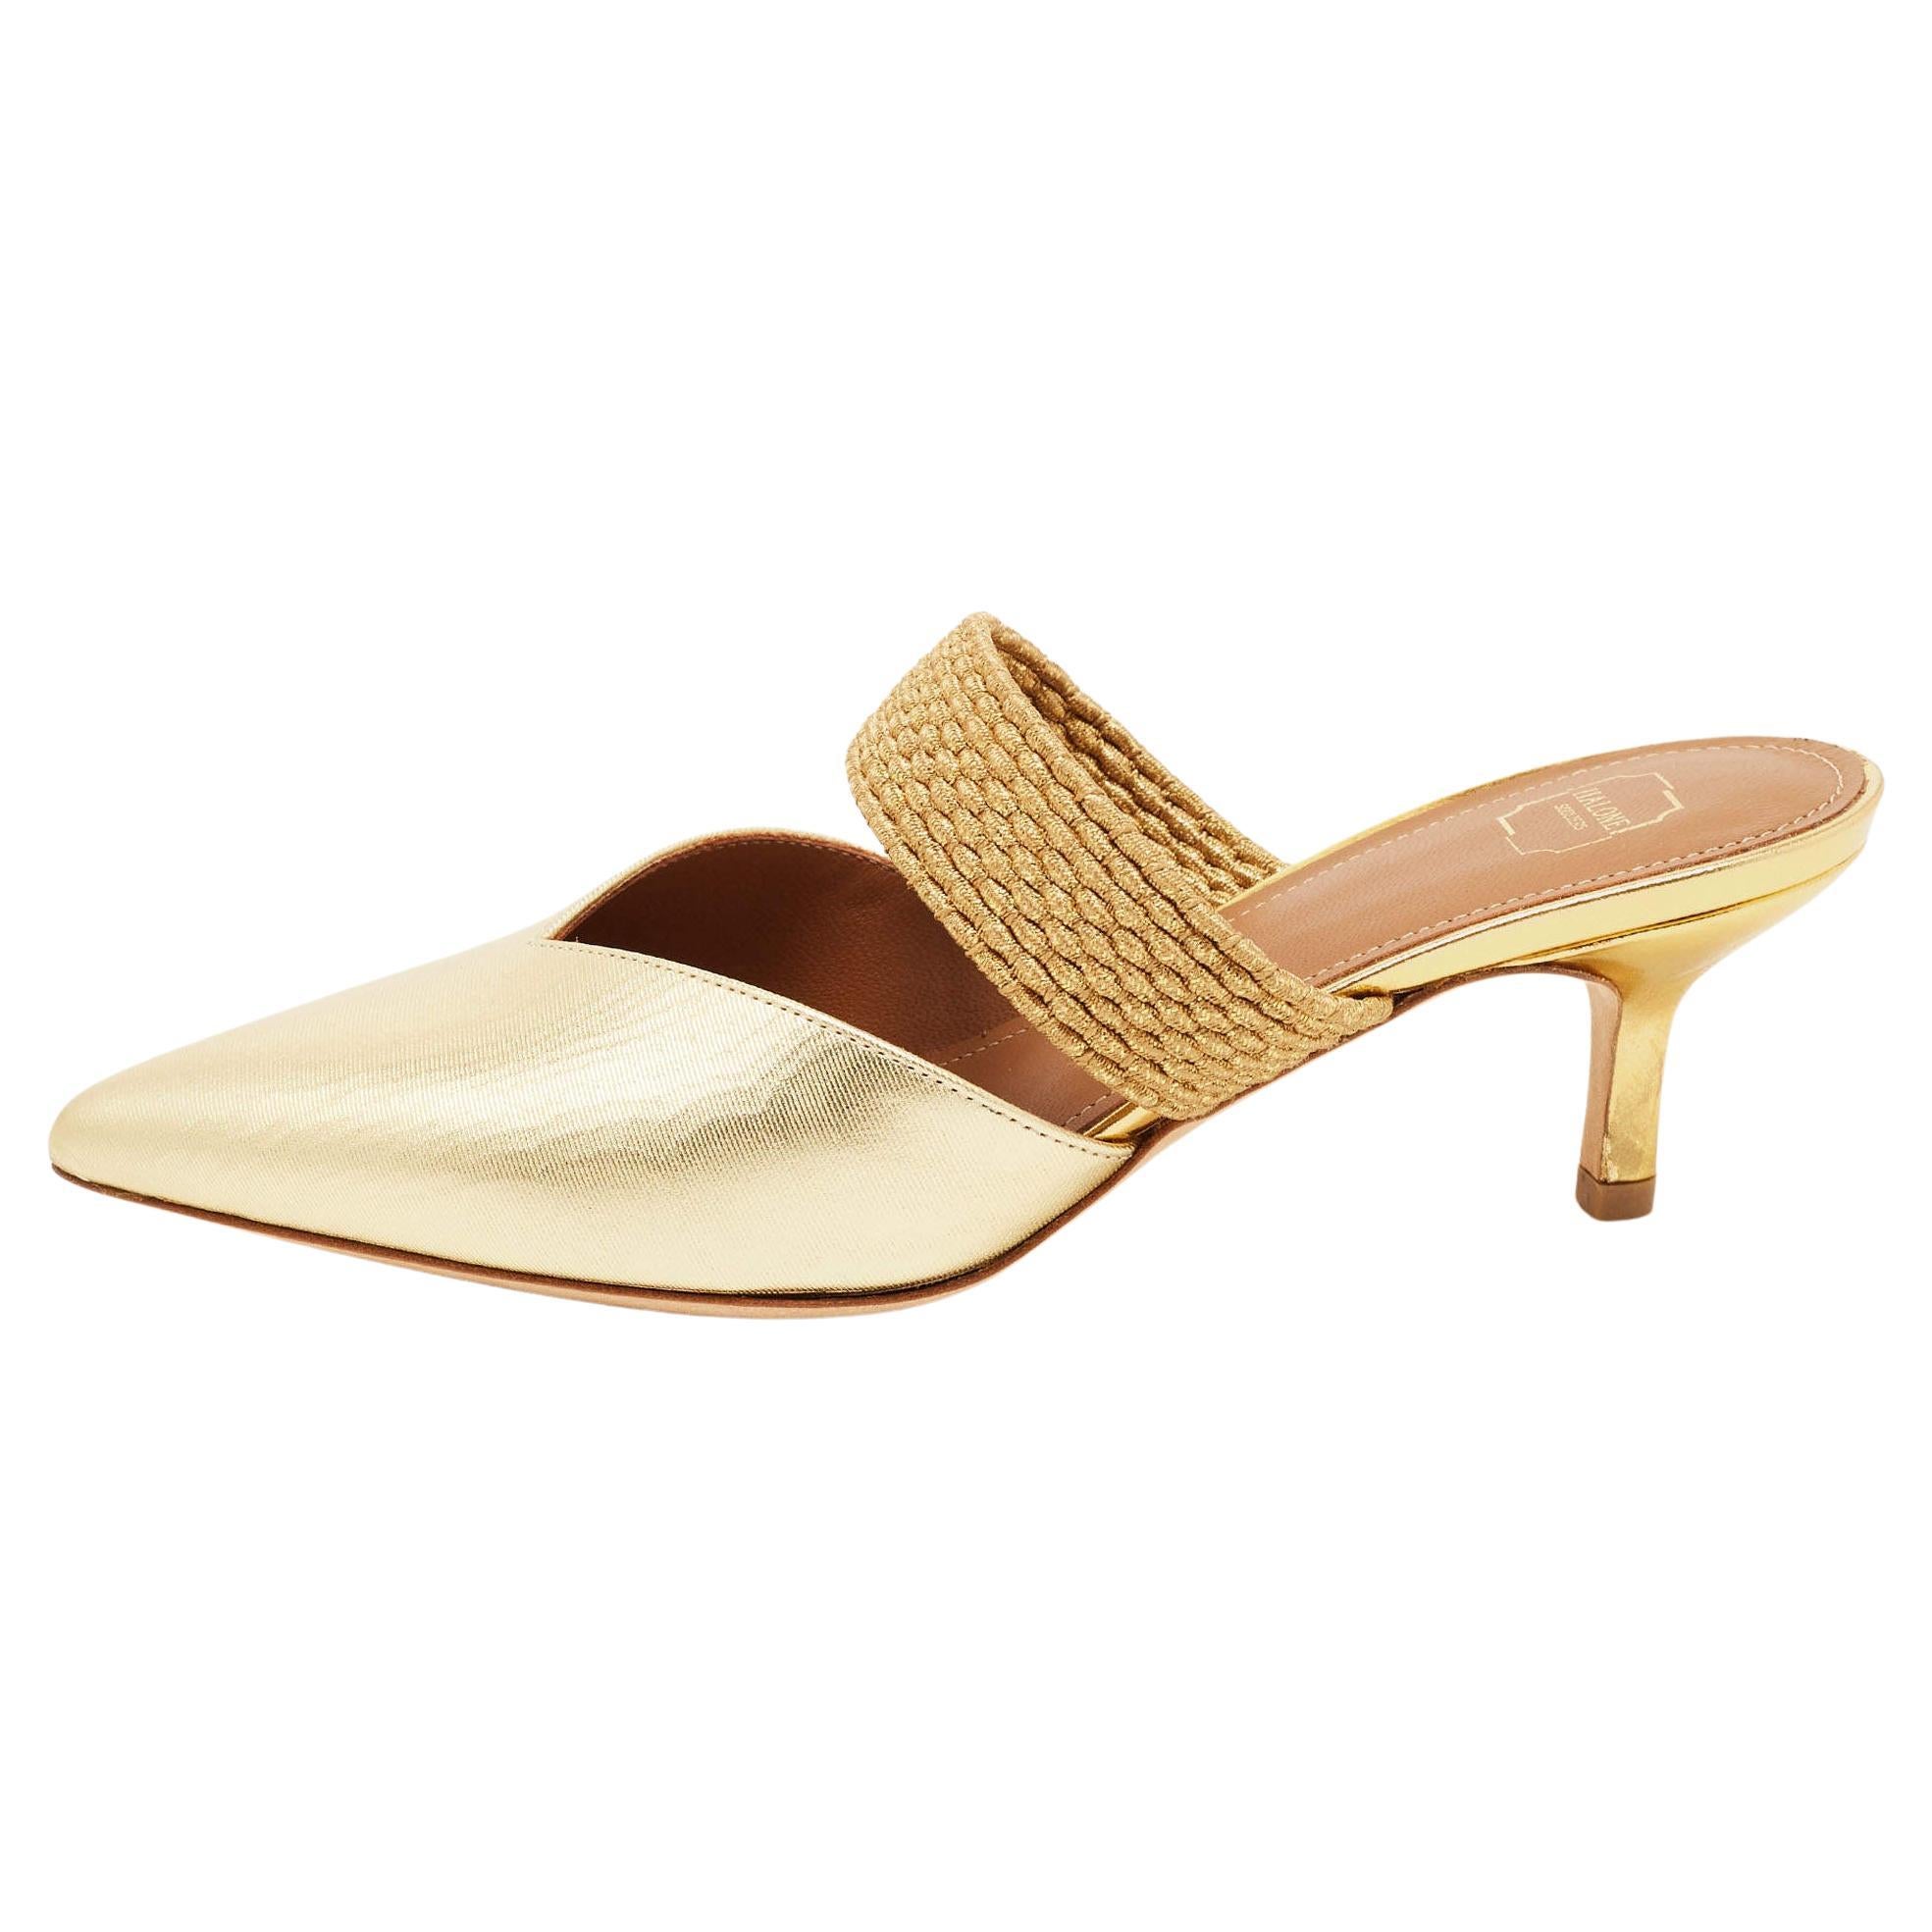 Malone Souliers Gold Leather Maisie Mules Size 35